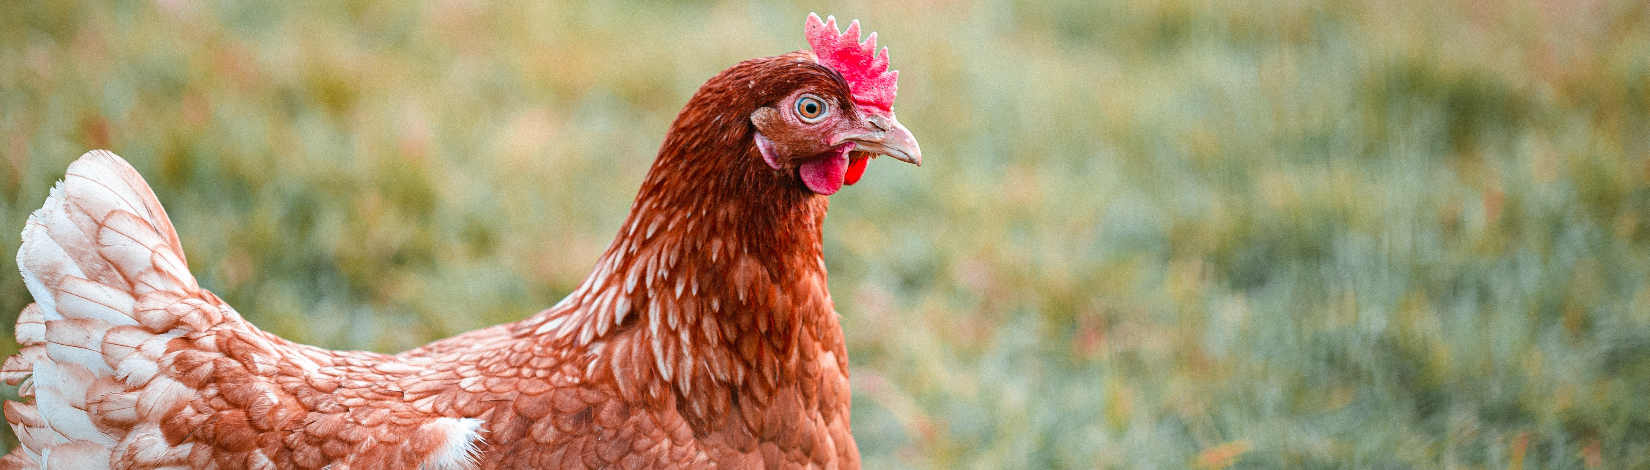 a close up image of a chicken